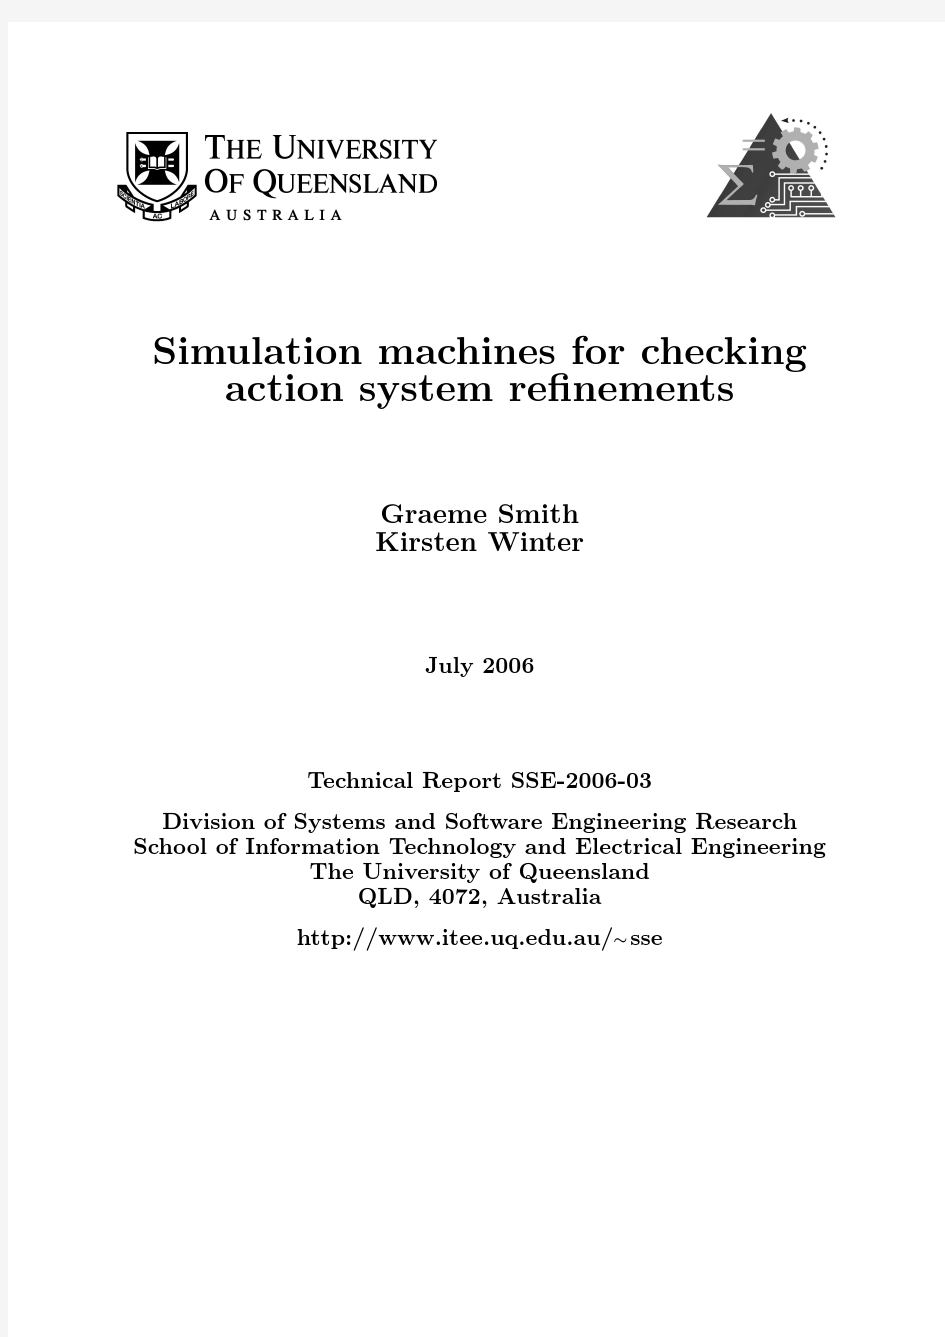 Simulation machines for checking action system refinements